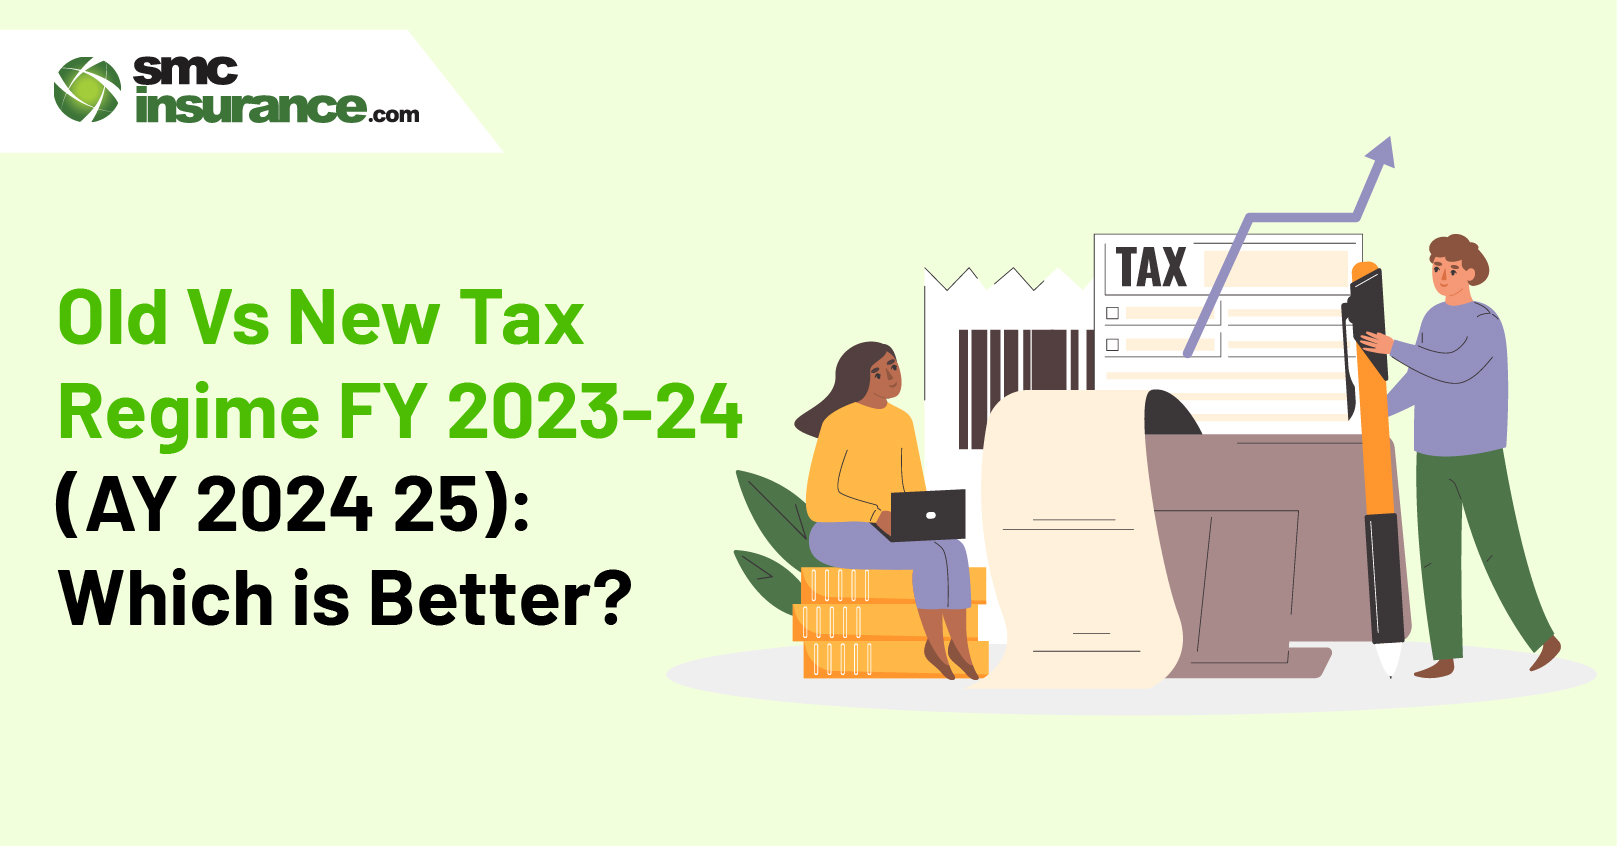 Old Vs New Tax Regime FY 2023-24 (AY 2024-25): Which is Better?